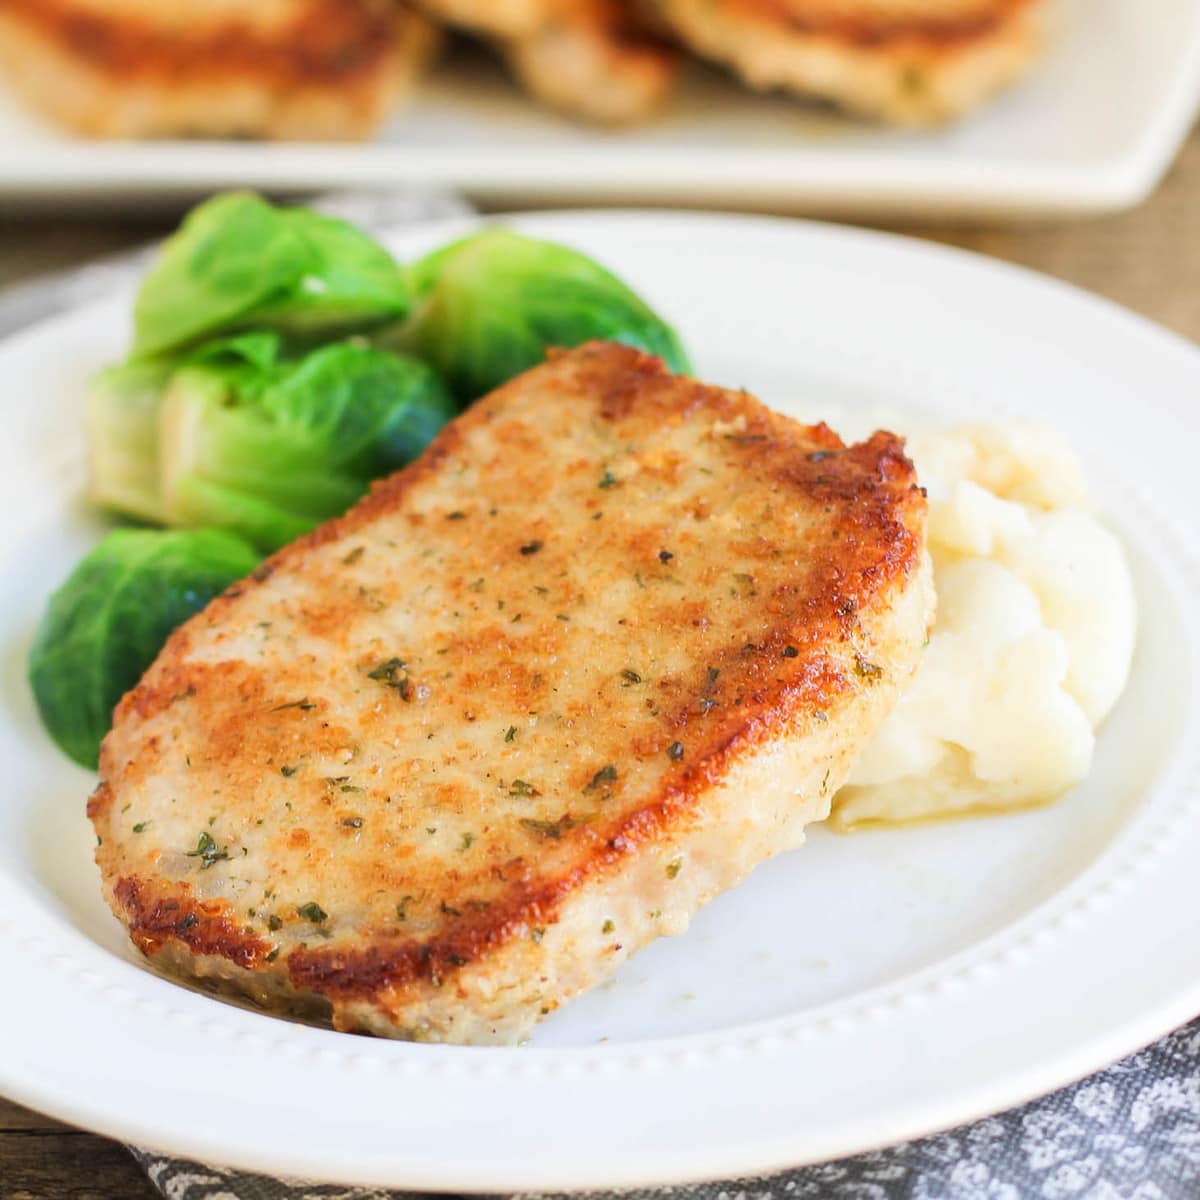 Baked Parmesan Pork Chop on a plate with mashed potatoes and brussel sprouts